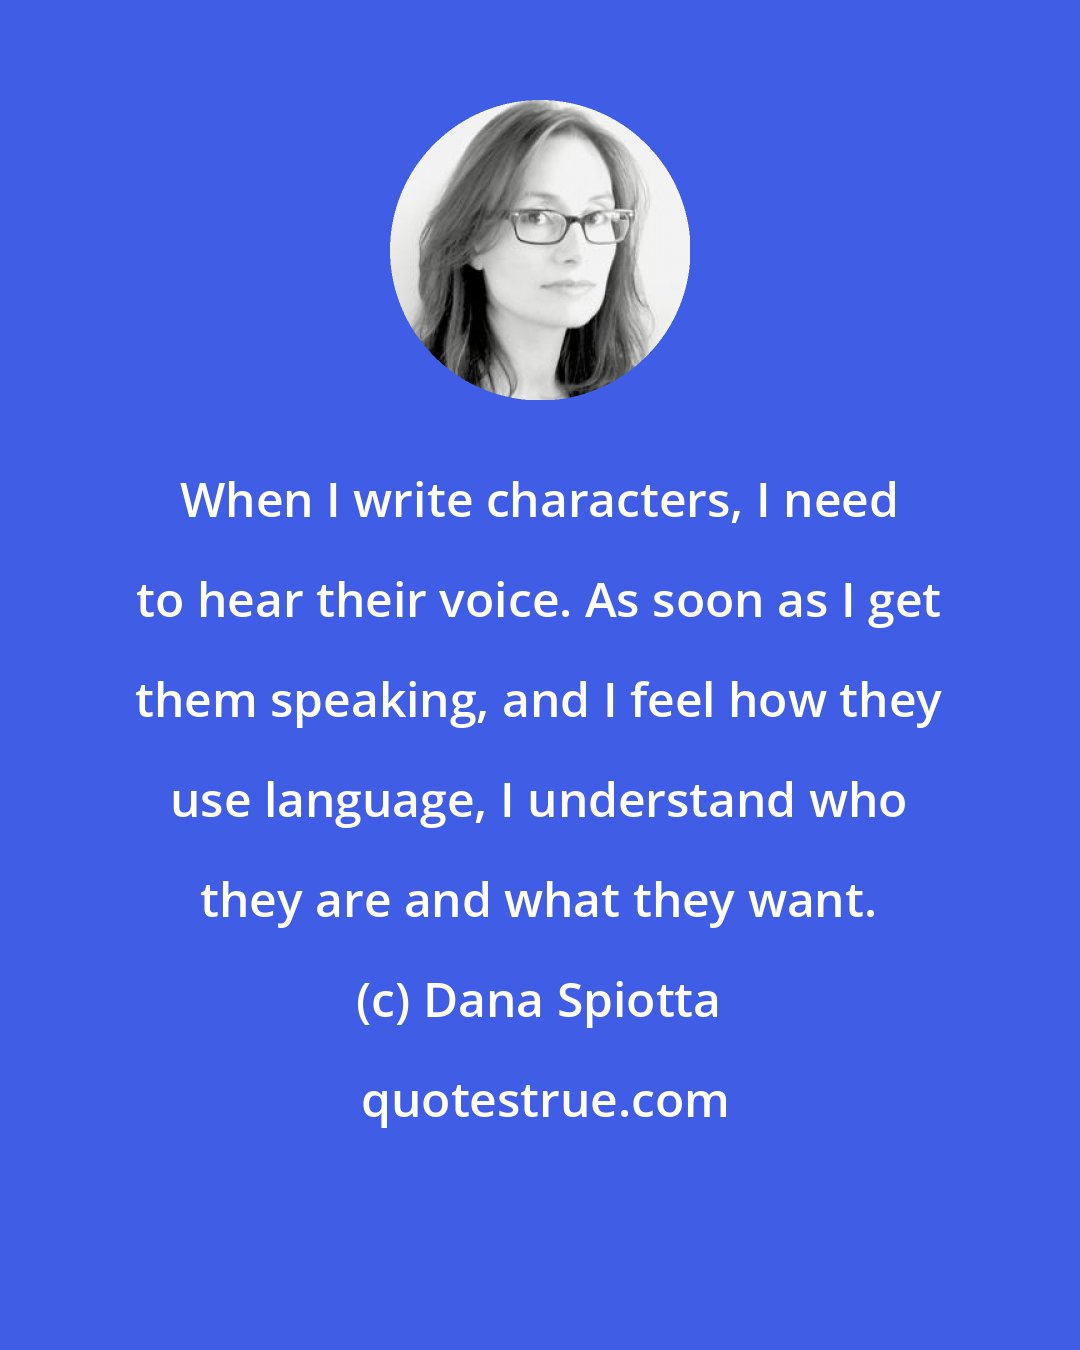 Dana Spiotta: When I write characters, I need to hear their voice. As soon as I get them speaking, and I feel how they use language, I understand who they are and what they want.